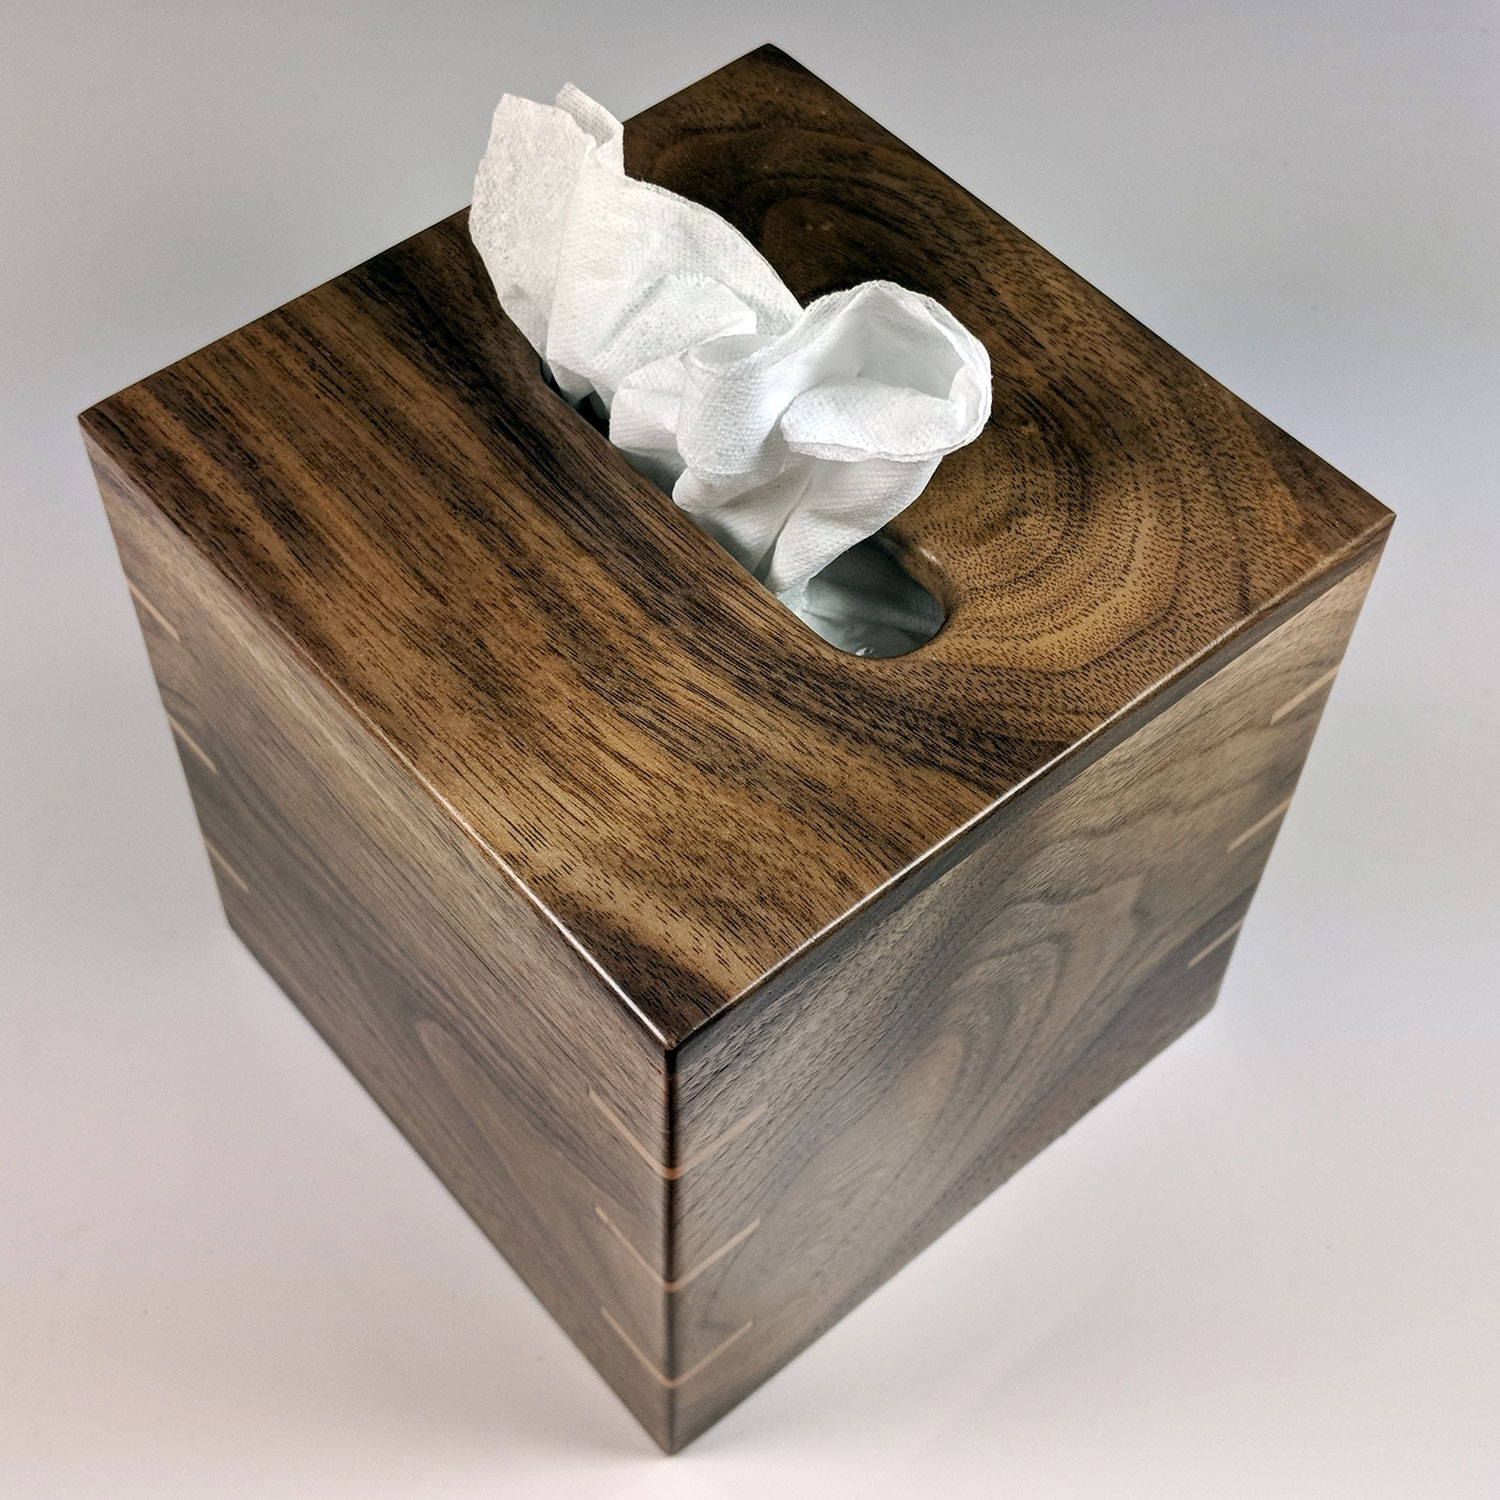 https://www.playingwithwood.com/wp-content/uploads/2018/12/tissue-box-square-walnut-maple-spines-4.jpg